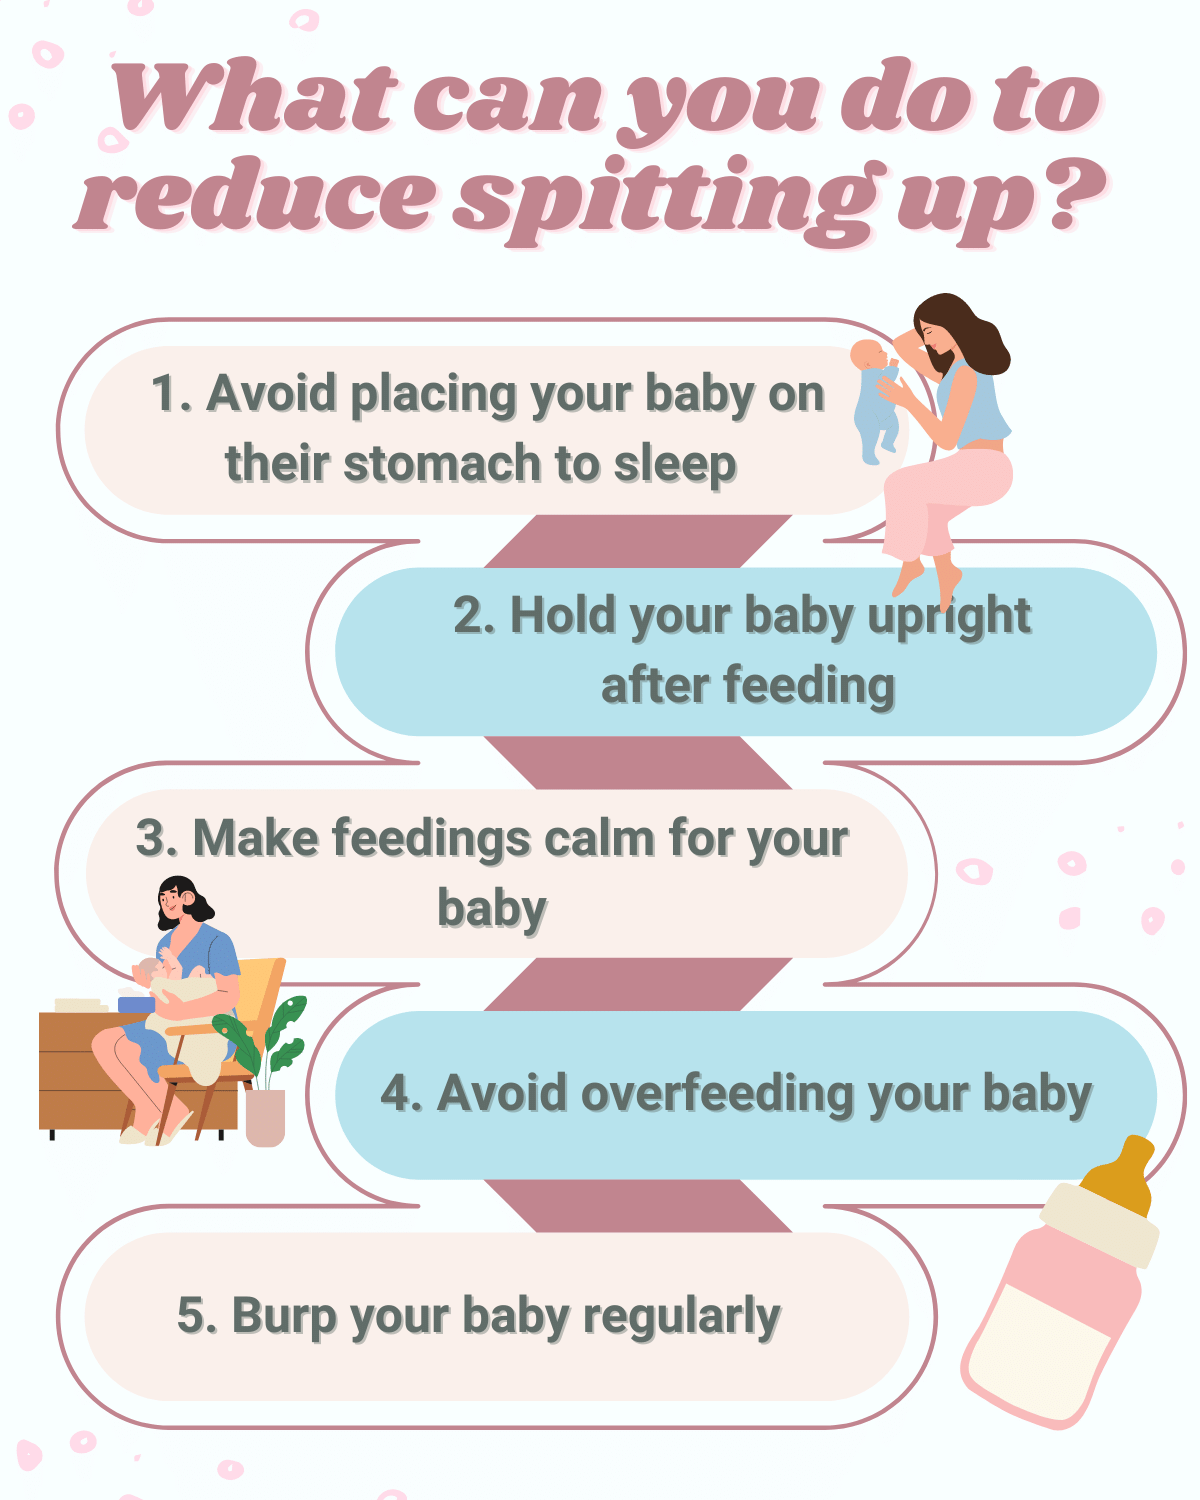 What can you do to reduce spitting up?